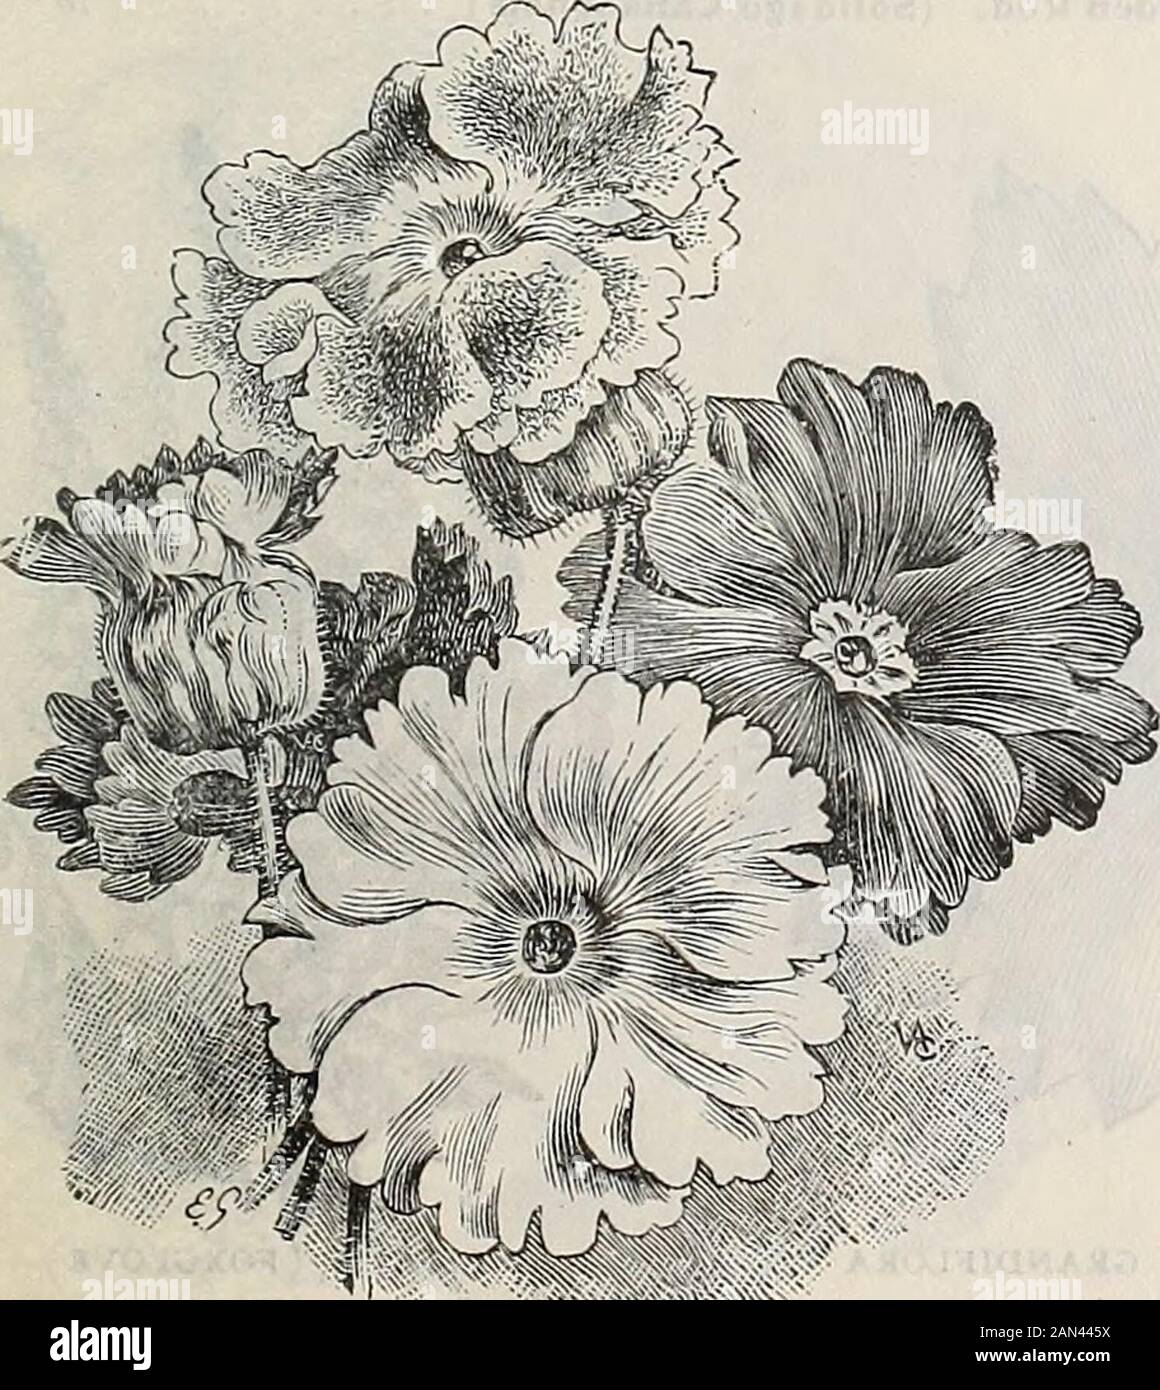 Dreer's wholesale price list 1906 : bulbs plants seasonable flower seeds and vegetable seeds grass seeds fertilizers, tools, etc., etc . Schizanthus. (Fringe Flower.) Dwarf.Large Flowered. Mixed ...Wisetonensis. Fine for pots. 17 cents per pkt. 3°. •v#&gt;ft £p:f PANSY—ROYAL EXHIBITION Smilax. Tr. pkt. Oz. 5° $3 00 5° 3 00 5° 3 00 50 3 00 5° 3 00 50 3 00 5° 2 50 50 7 5° 5° 5 00 5° 7 00 DREERS CHOICEST MIXED CHINESE PRIMROSES Every florist should grow some of this, always needed. Tr. pkt.,10 cts.; Oz. 30 cts.; Ji-lb., $1.00 ; 1 lb., $3.00. Stocks (Gilliflower). CuUand-Come-Again Ten Weeks Stock Stock Photo